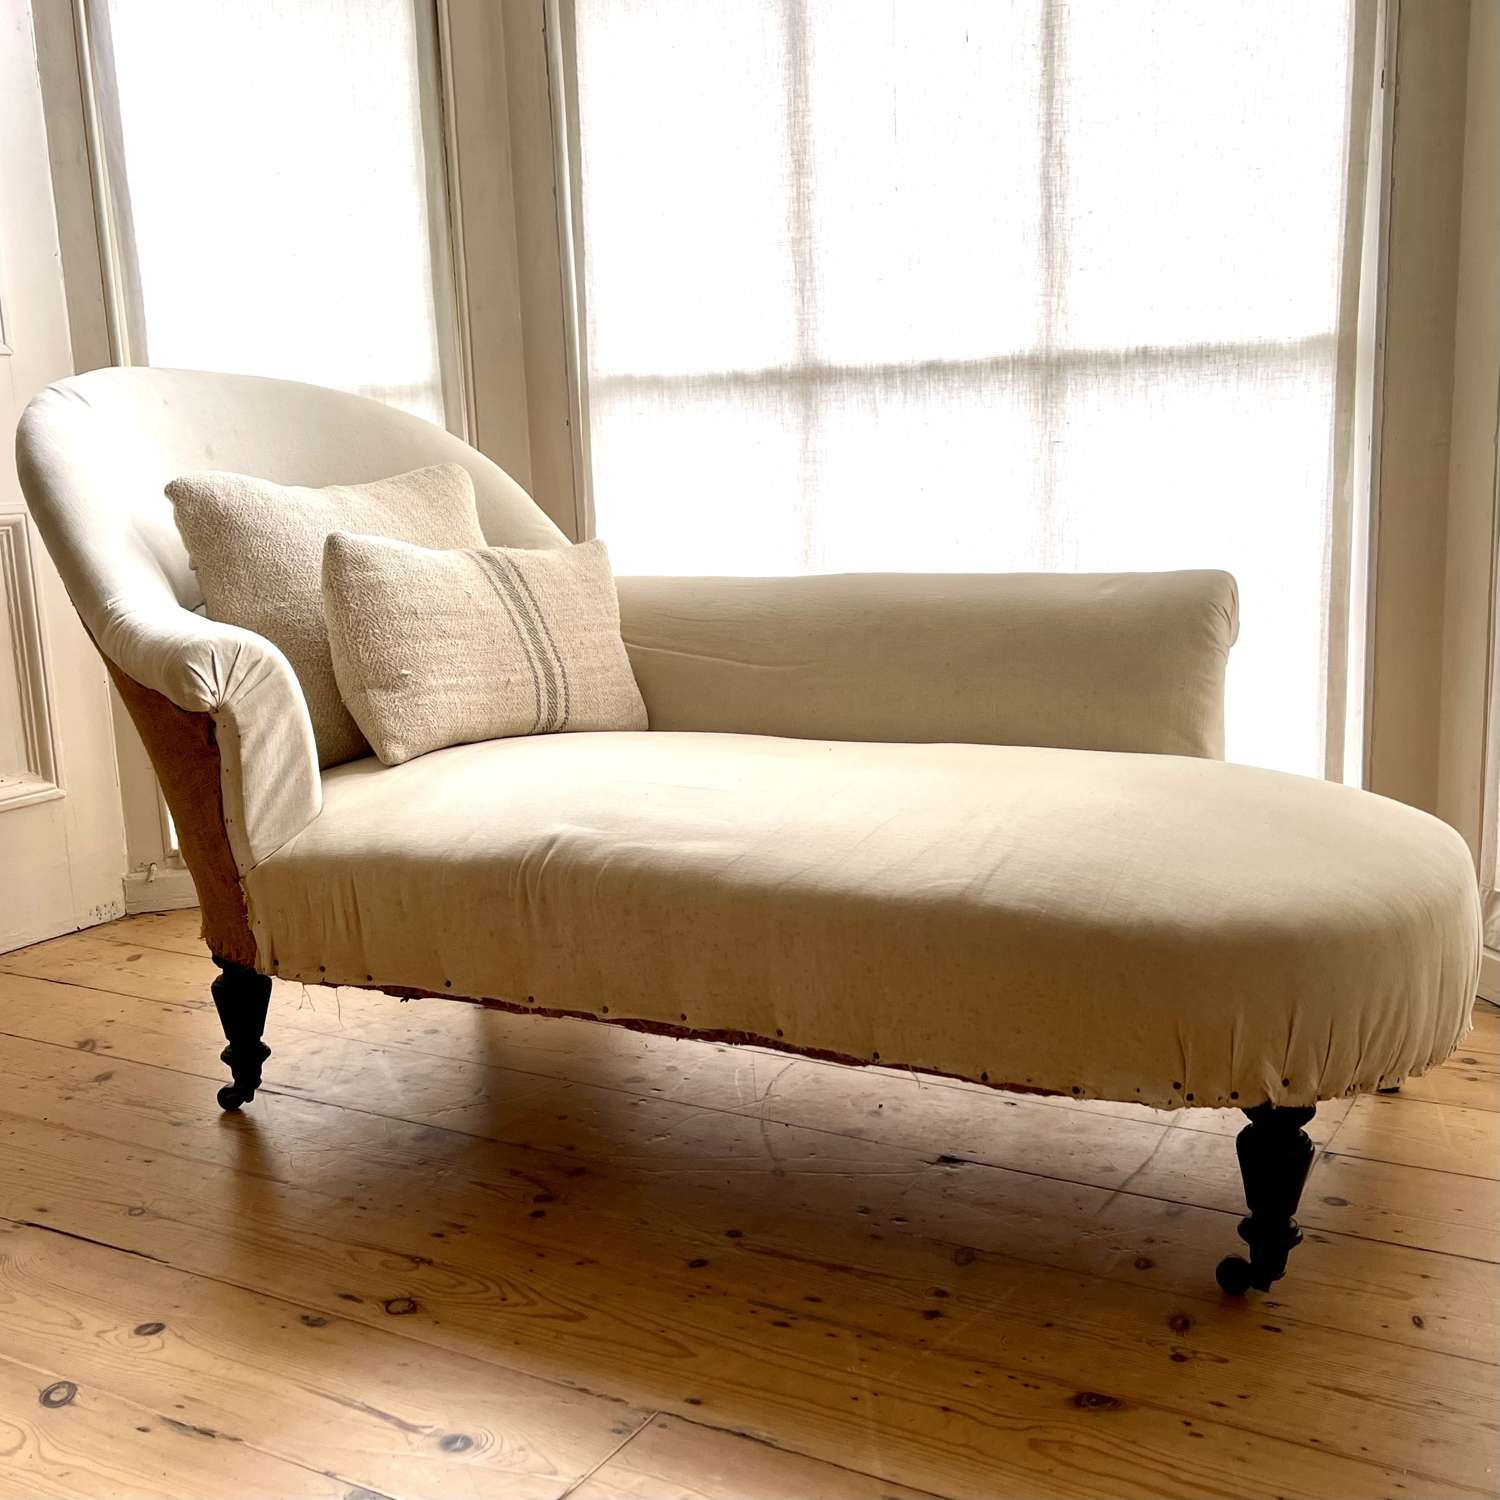 Antique French chaise longue